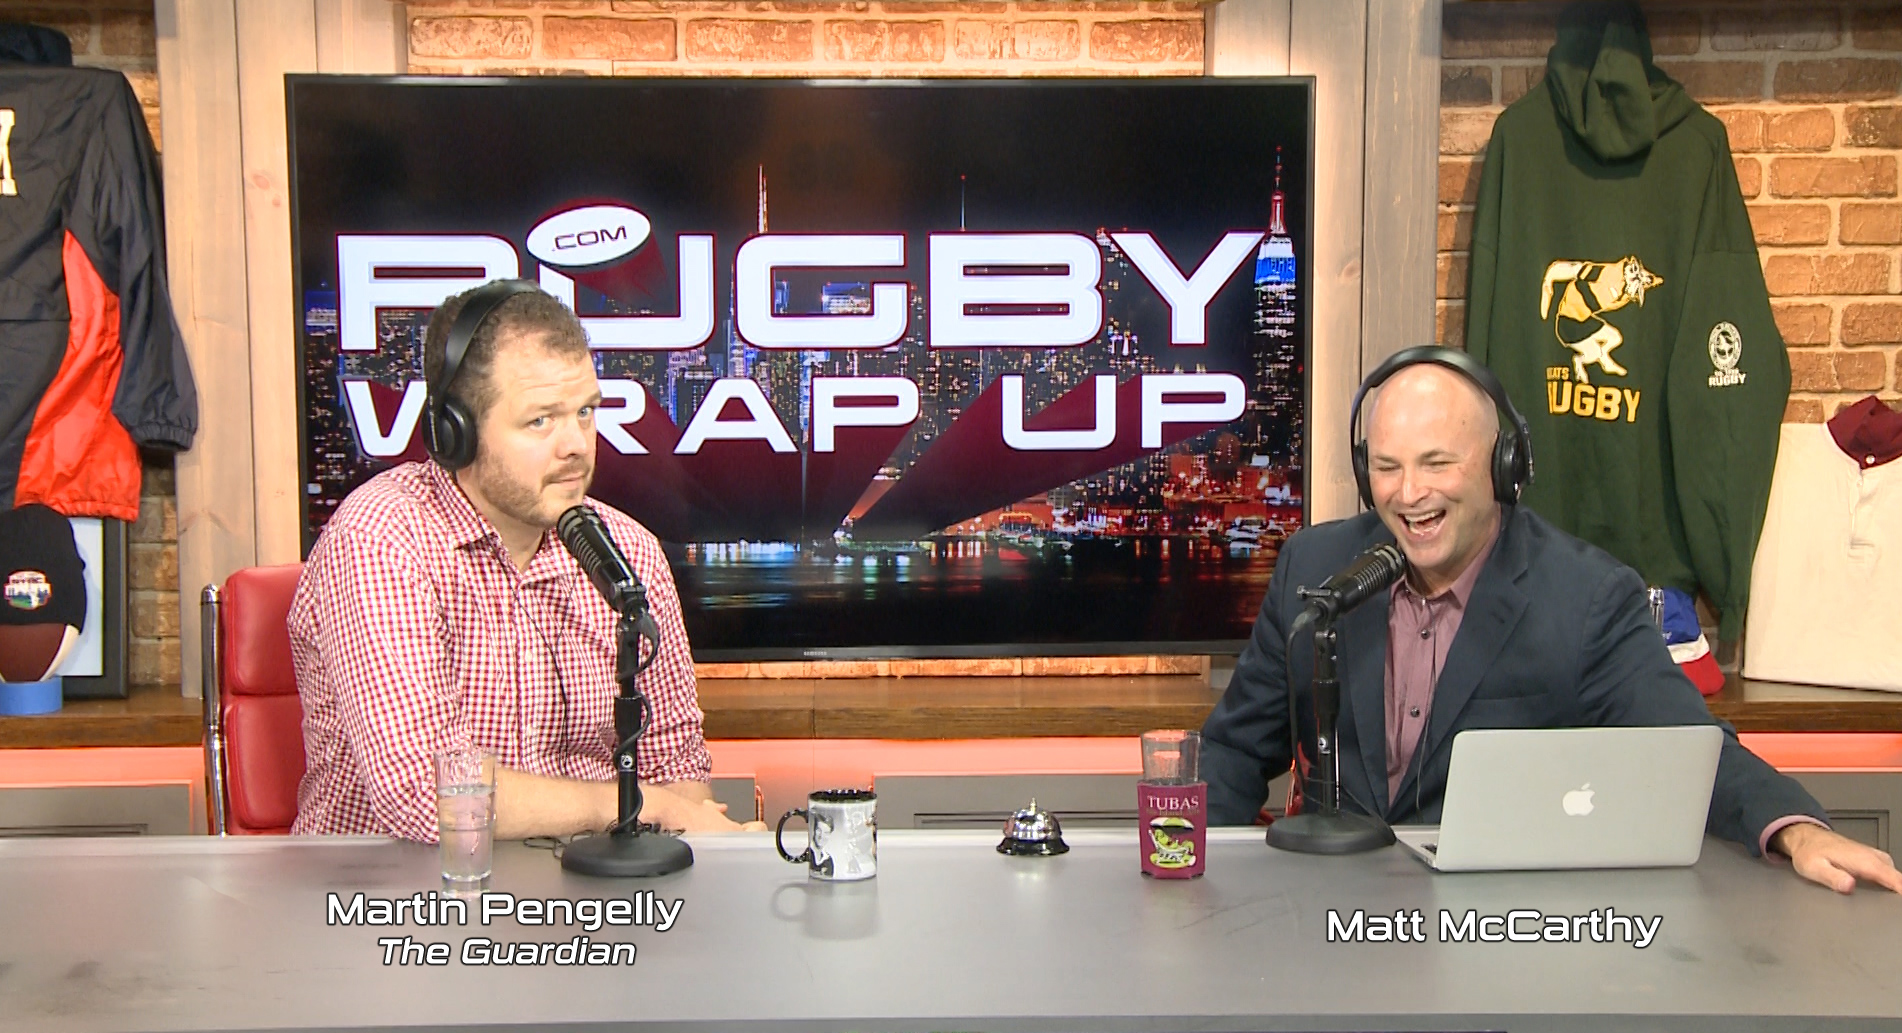 Martin Pengelly of The Guardian joins Matt McCarthy of RugbyWrapUp.com re USA Rugby, Pro 14, #CanAmRugby